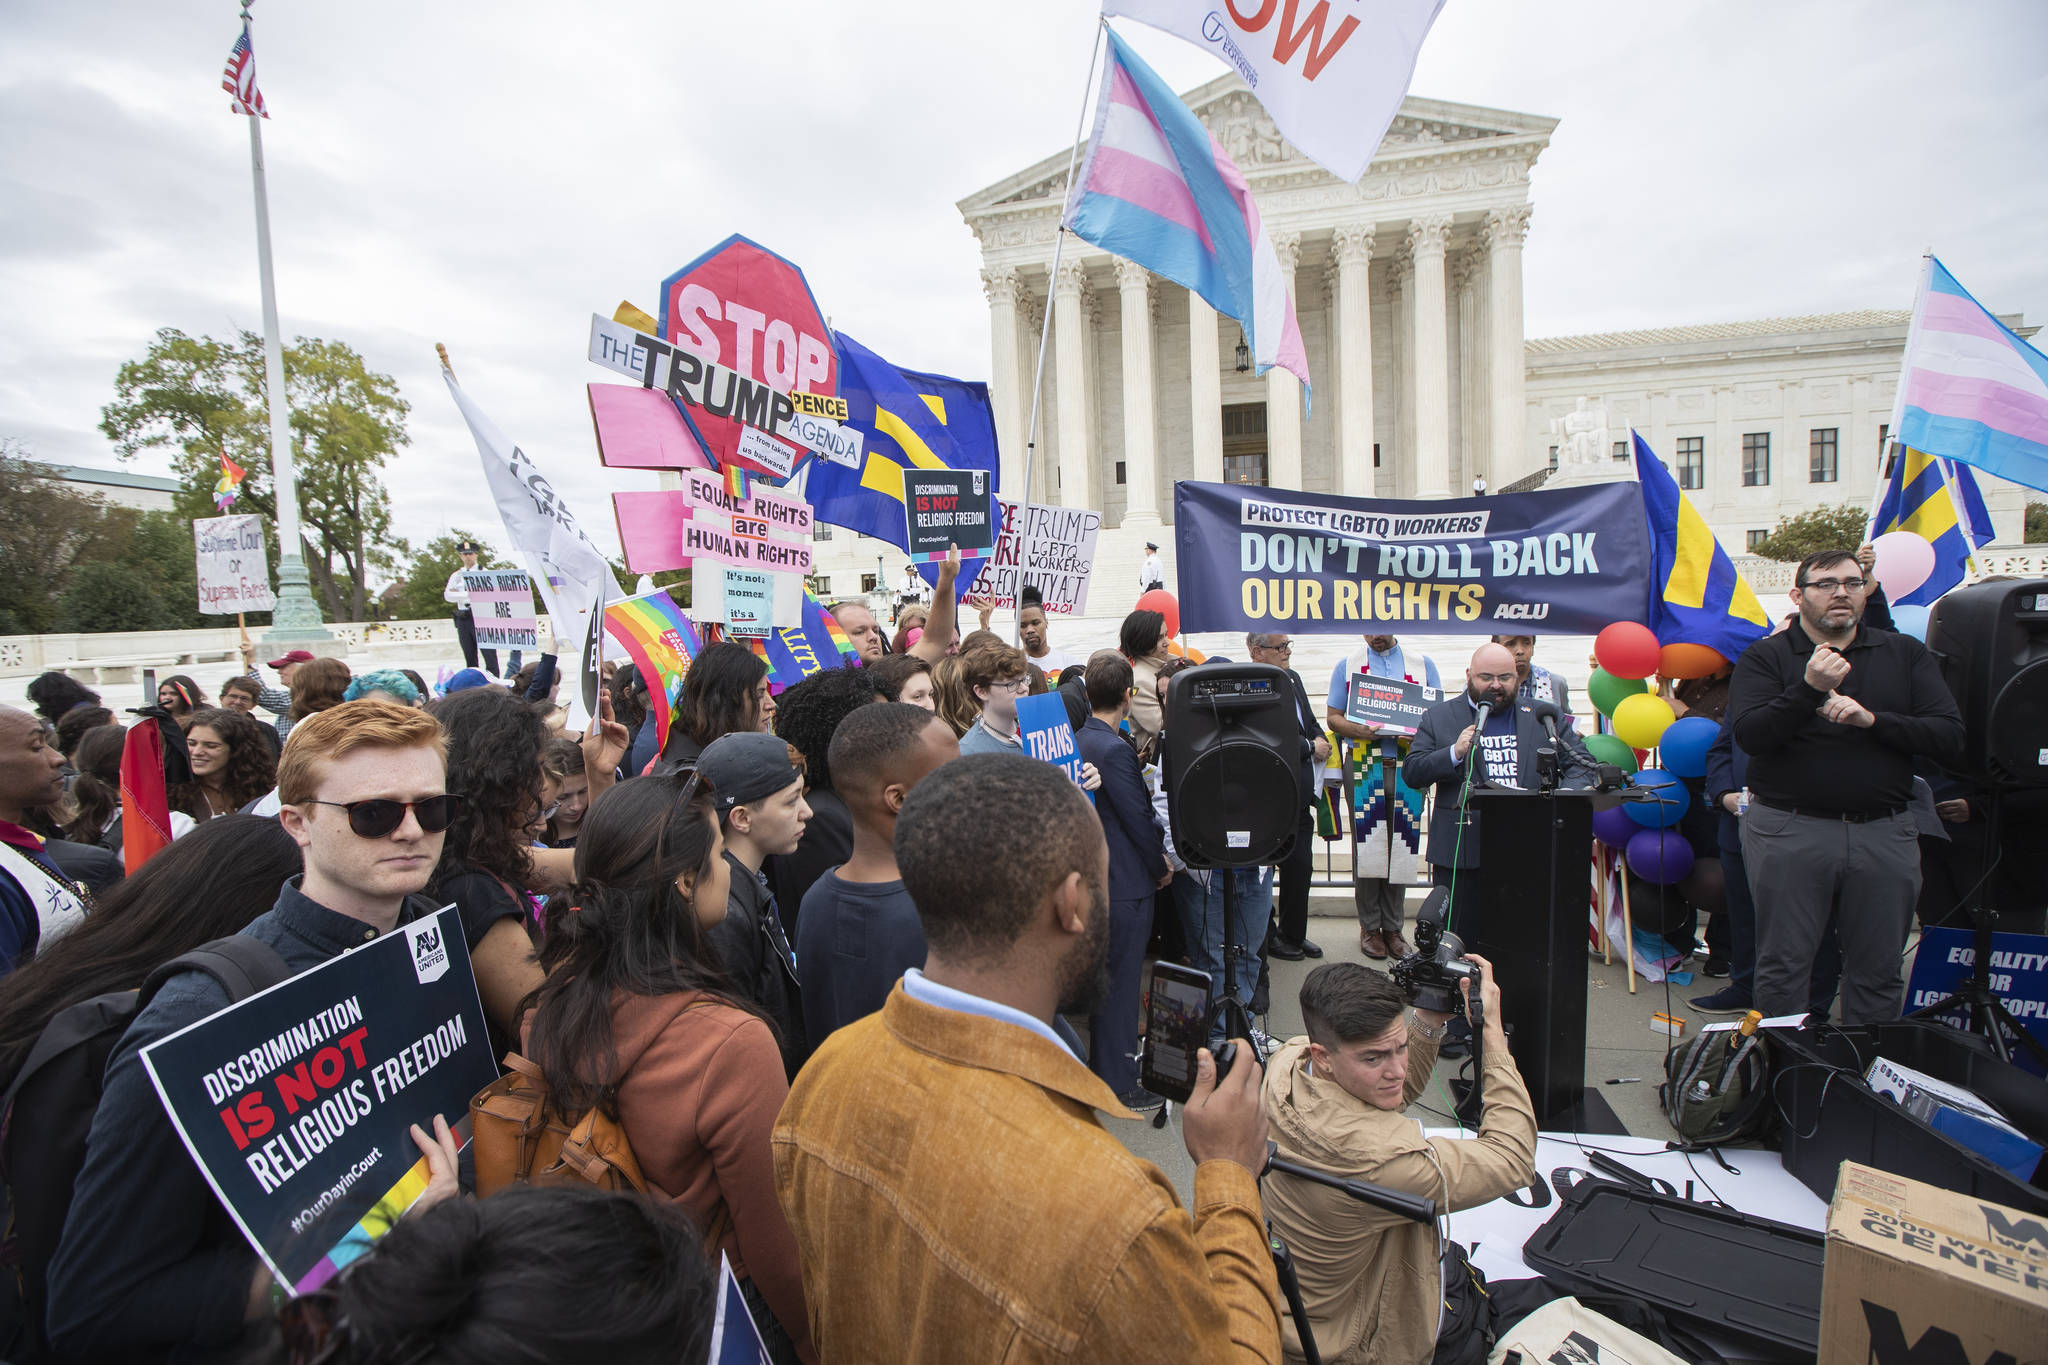 LGBT supporters gather in front of the U.S. Supreme Court, Tuesday, Oct. 8, 2019, in Washington. The Supreme Court is set to hear arguments in its first cases on LGBT rights since the retirement of Justice Anthony Kennedy. Kennedy was a voice for gay rights while his successor, Brett Kavanaugh, is regarded as more conservative. (AP Photo/Manuel Balce Ceneta)